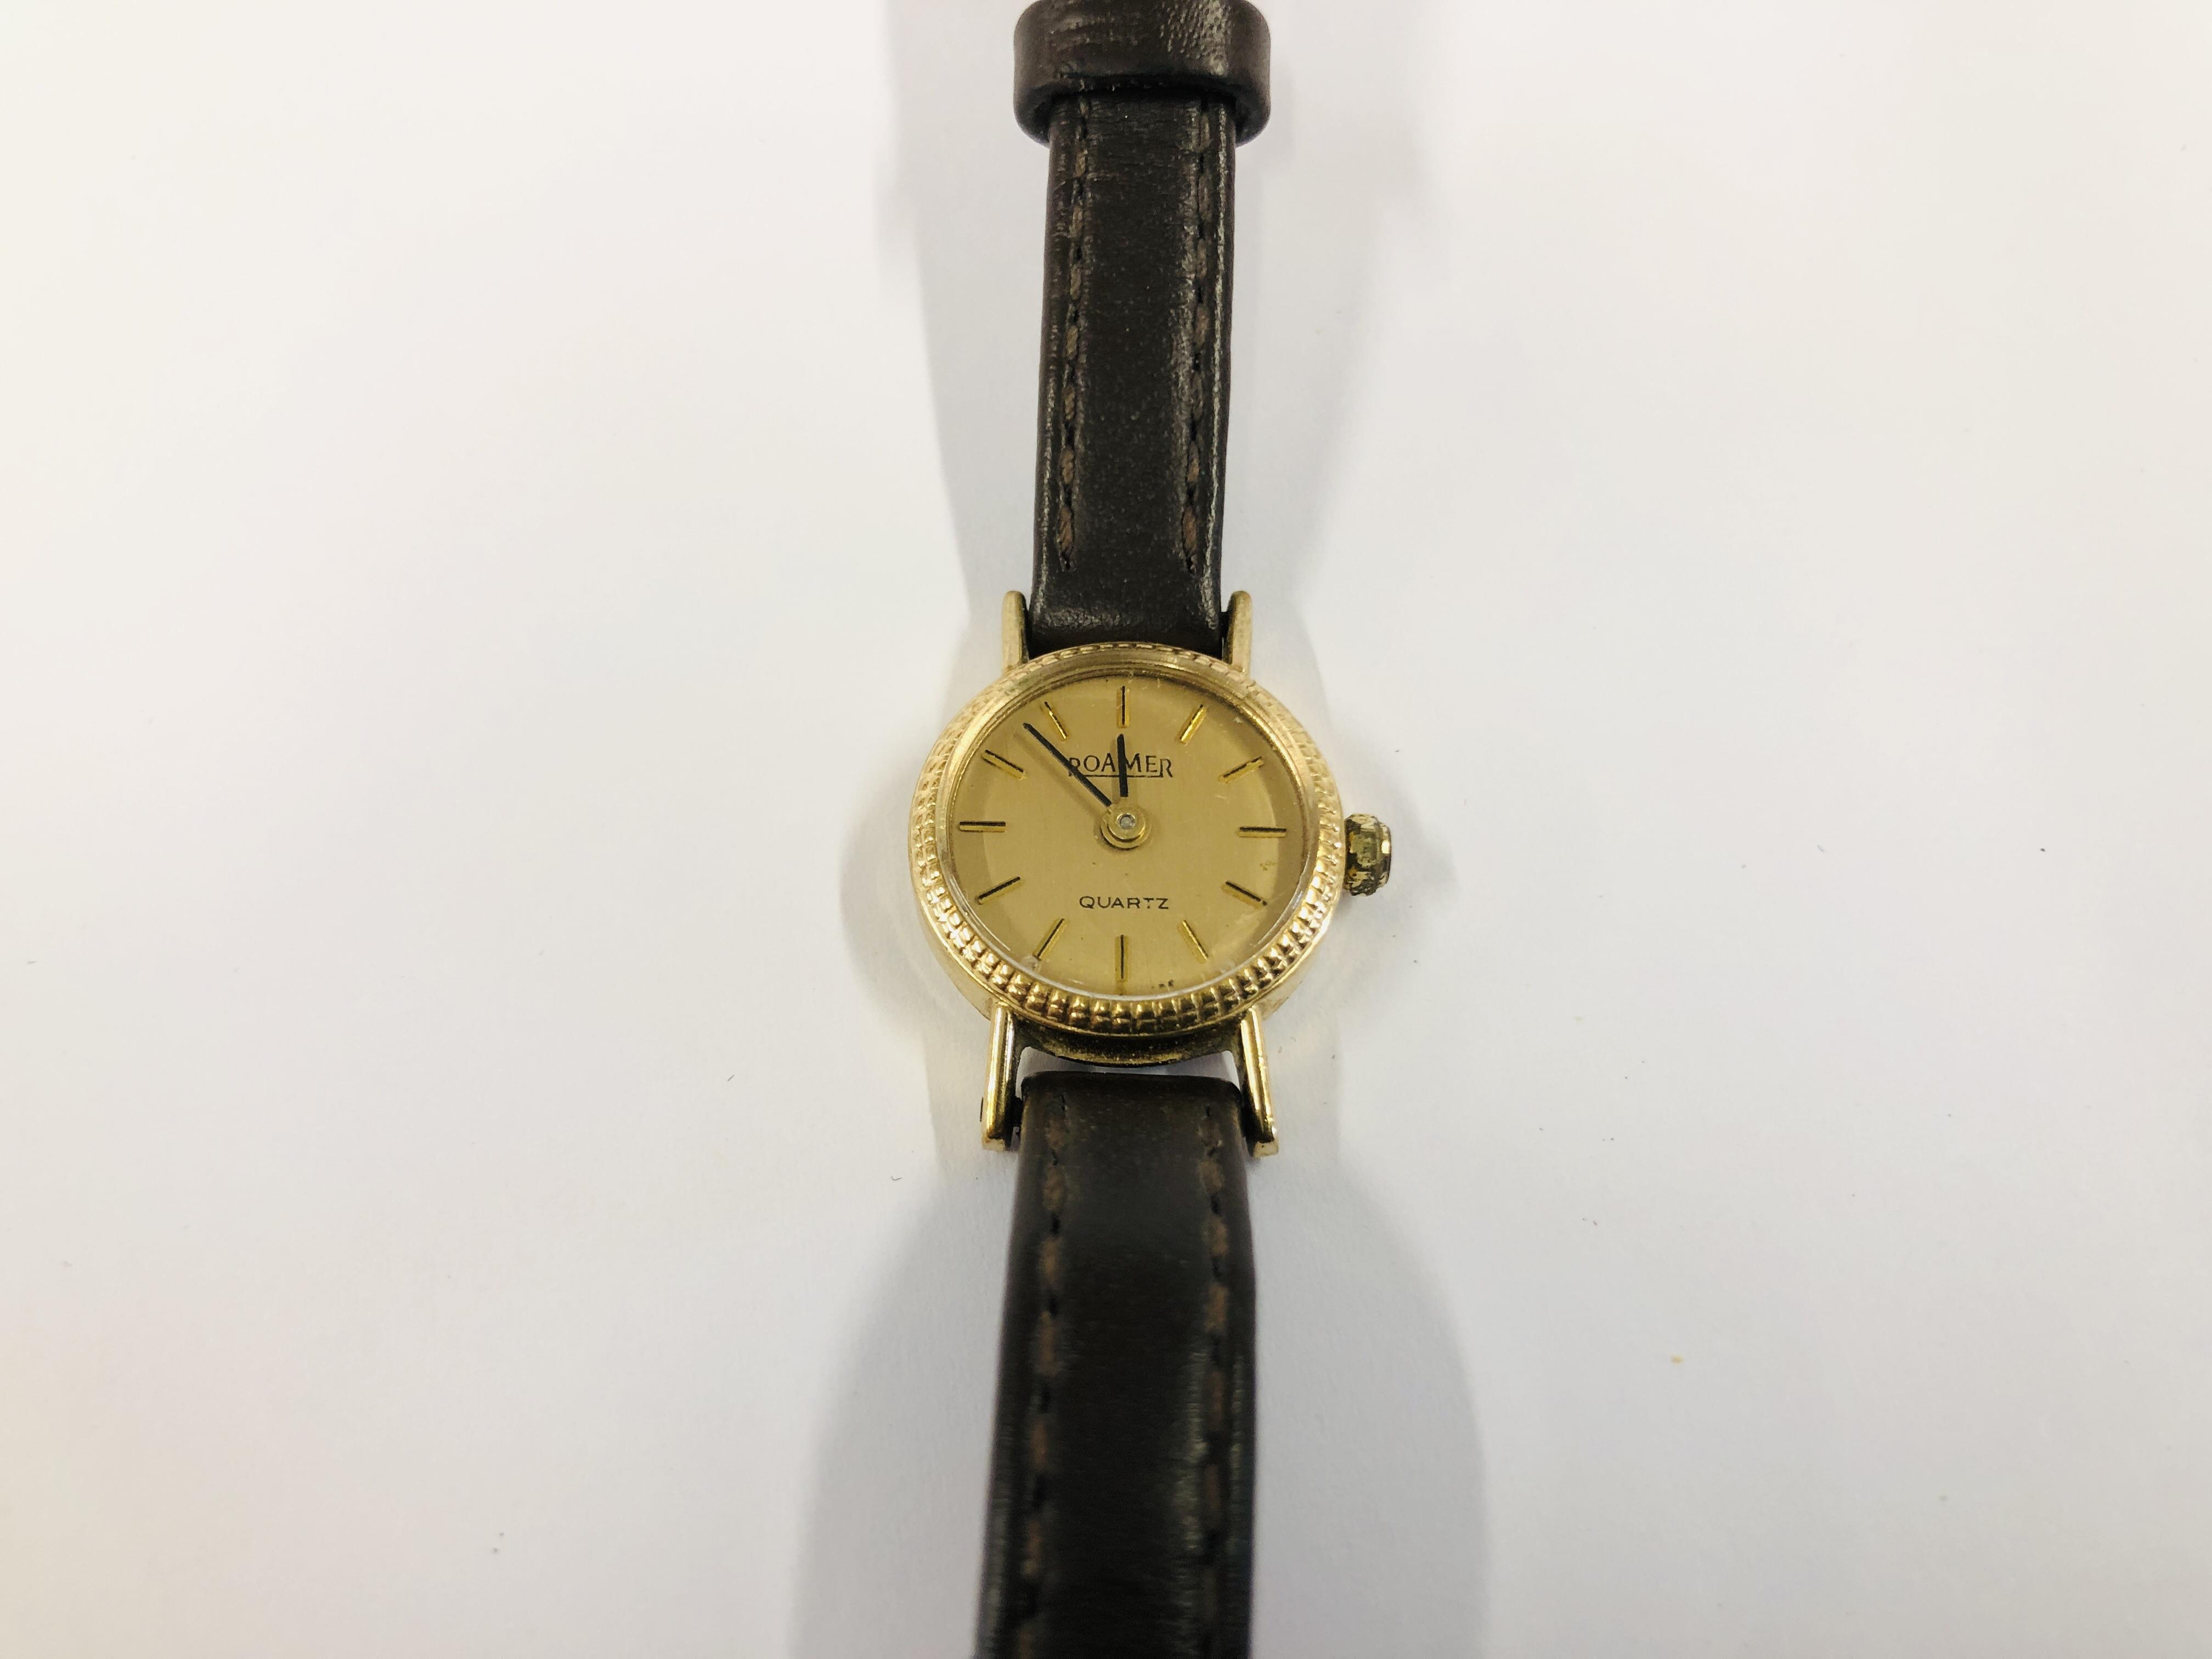 LADIES ROAMER 9CT GOLD CASED WRIST WATCH ON A BROWN LEATHER STRAP.